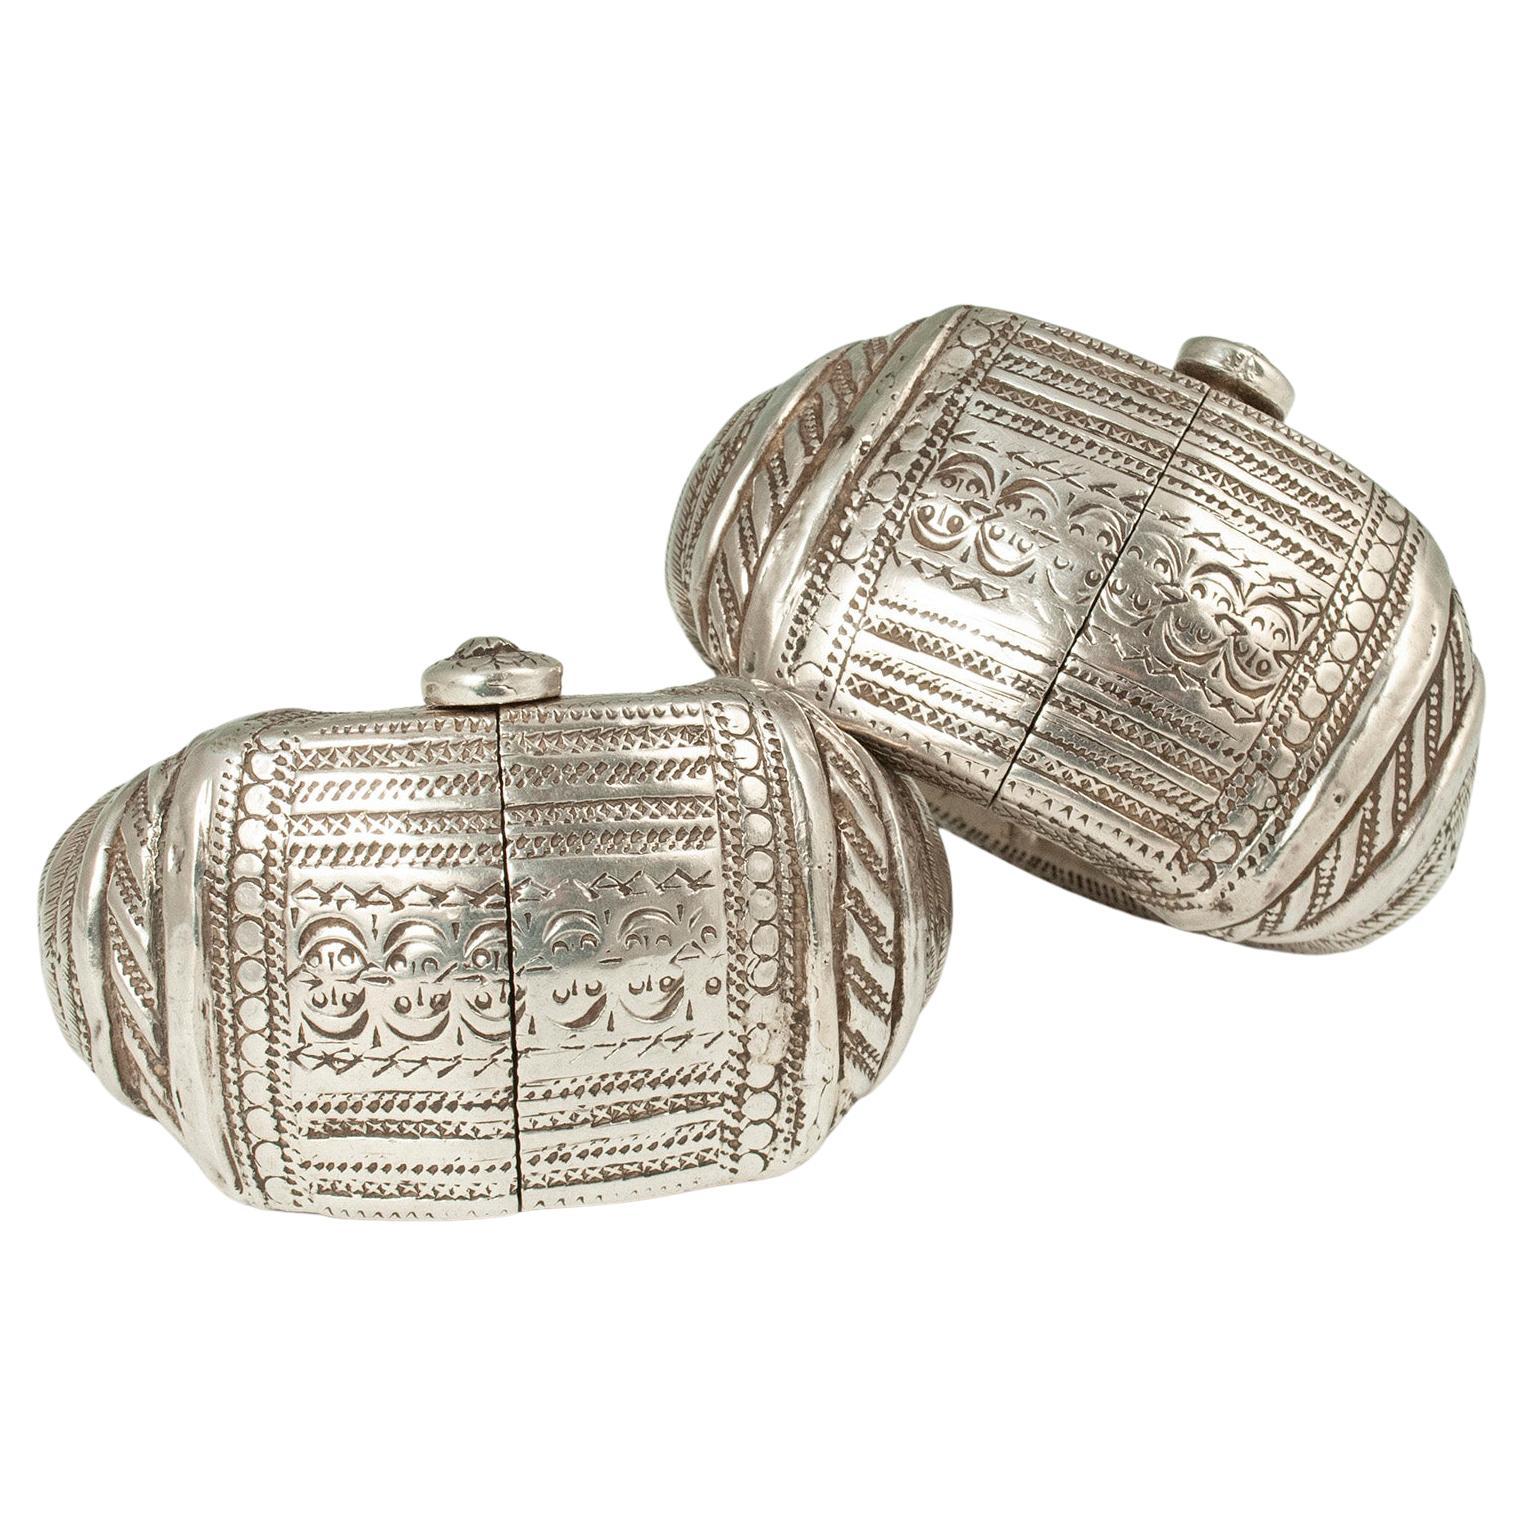 Late 19th to Early 20th Century Silver Anklets, Oman